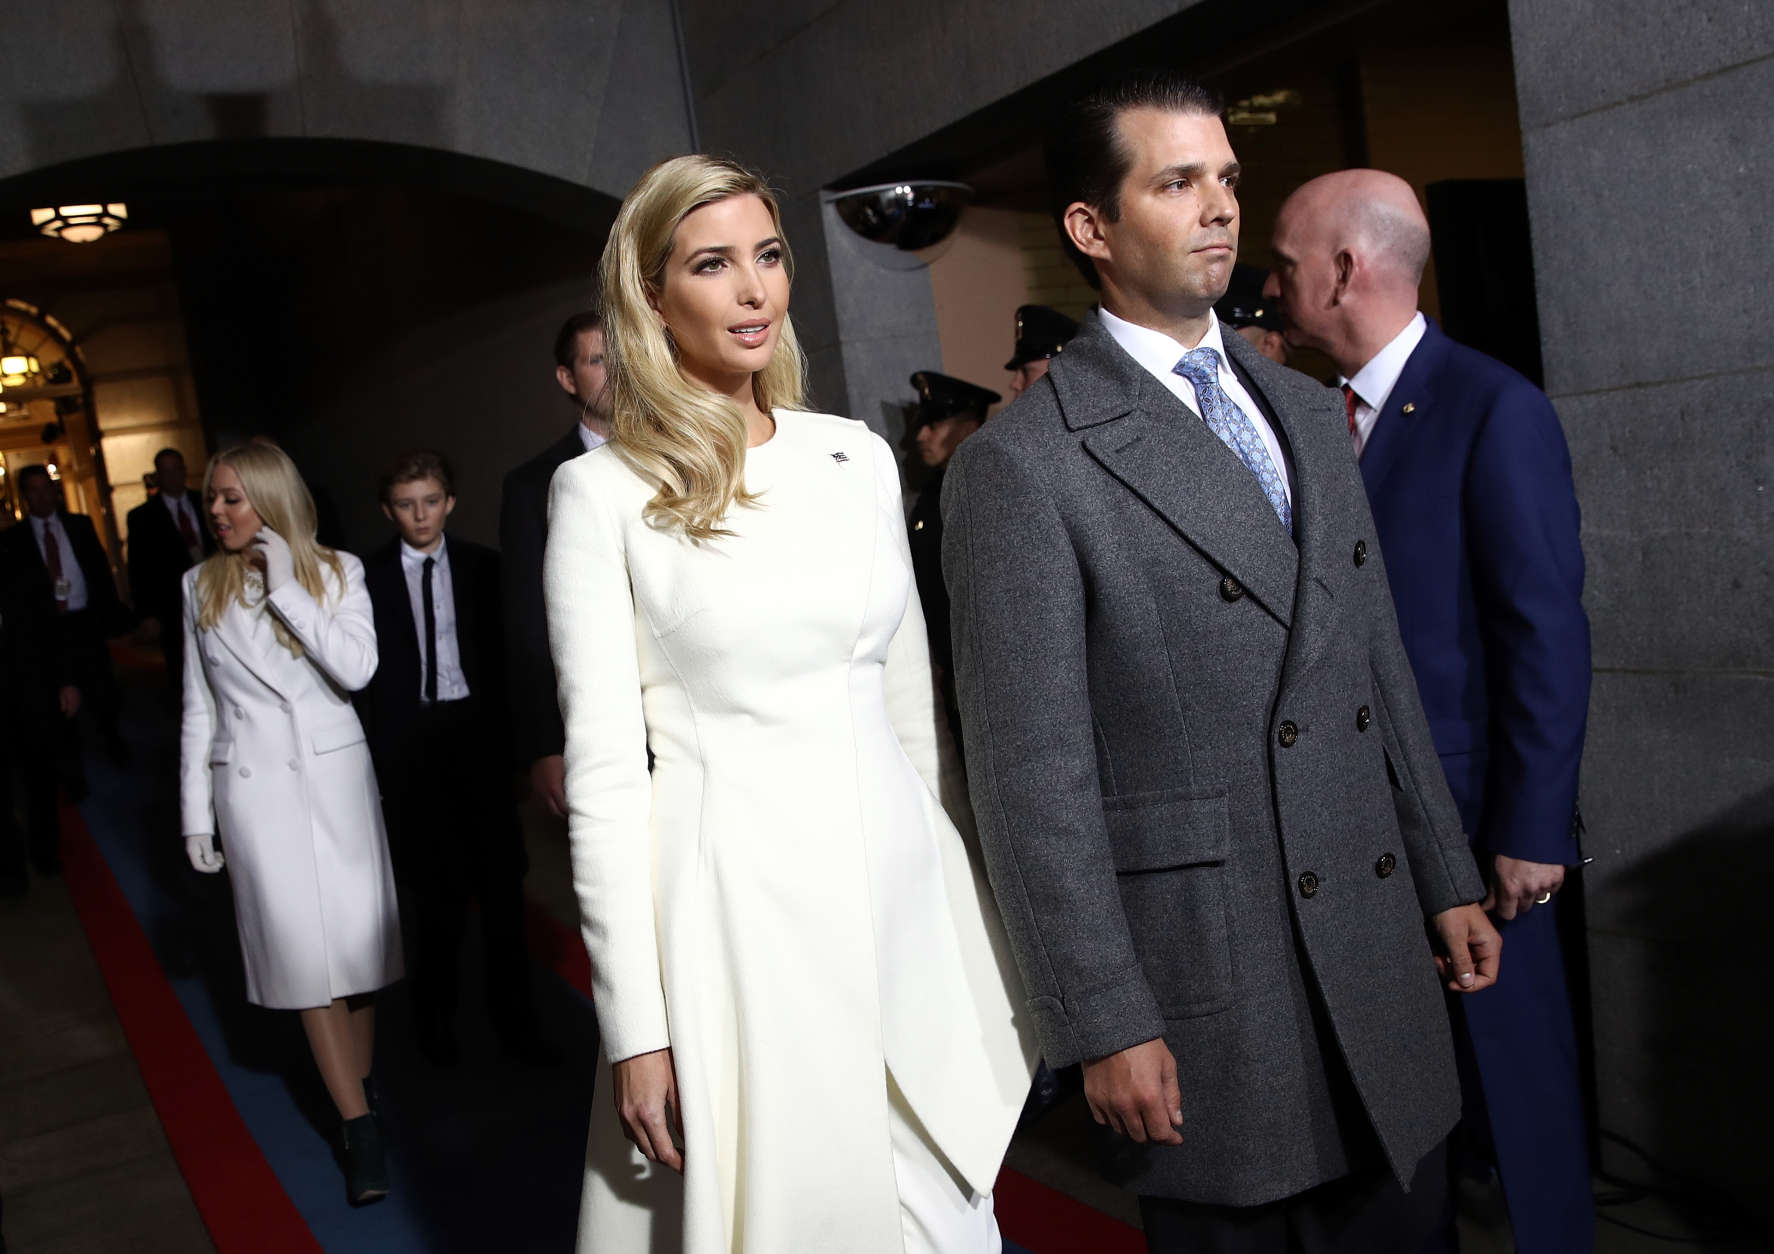 WASHINGTON, DC - JANUARY 20:  (L-R) Ivanka Trump and Donald Trump, Jr. arrive on the West Front of the U.S. Capitol on January 20, 2017 in Washington, DC. In today's inauguration ceremony Donald J. Trump becomes the 45th president of the United States.  (Photo by Win McNamee/Getty Images)